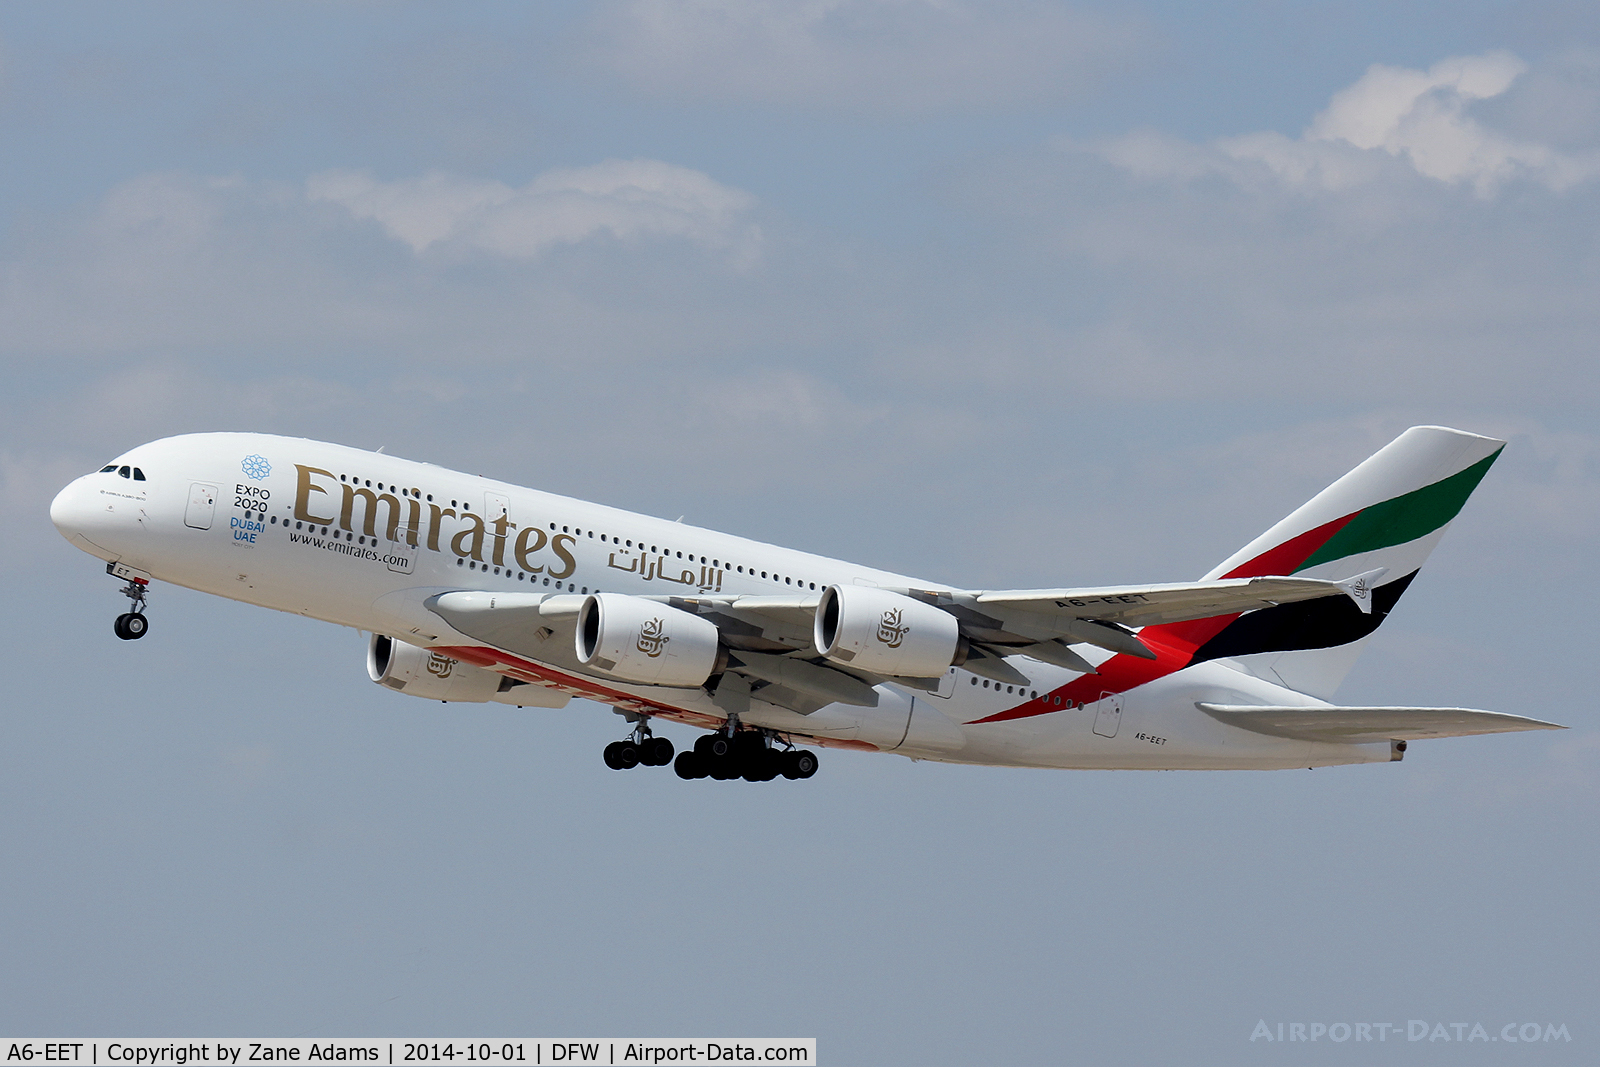 A6-EET, 2013 Airbus A380-861 C/N 142, Emirates A380 Departing DFW Airport